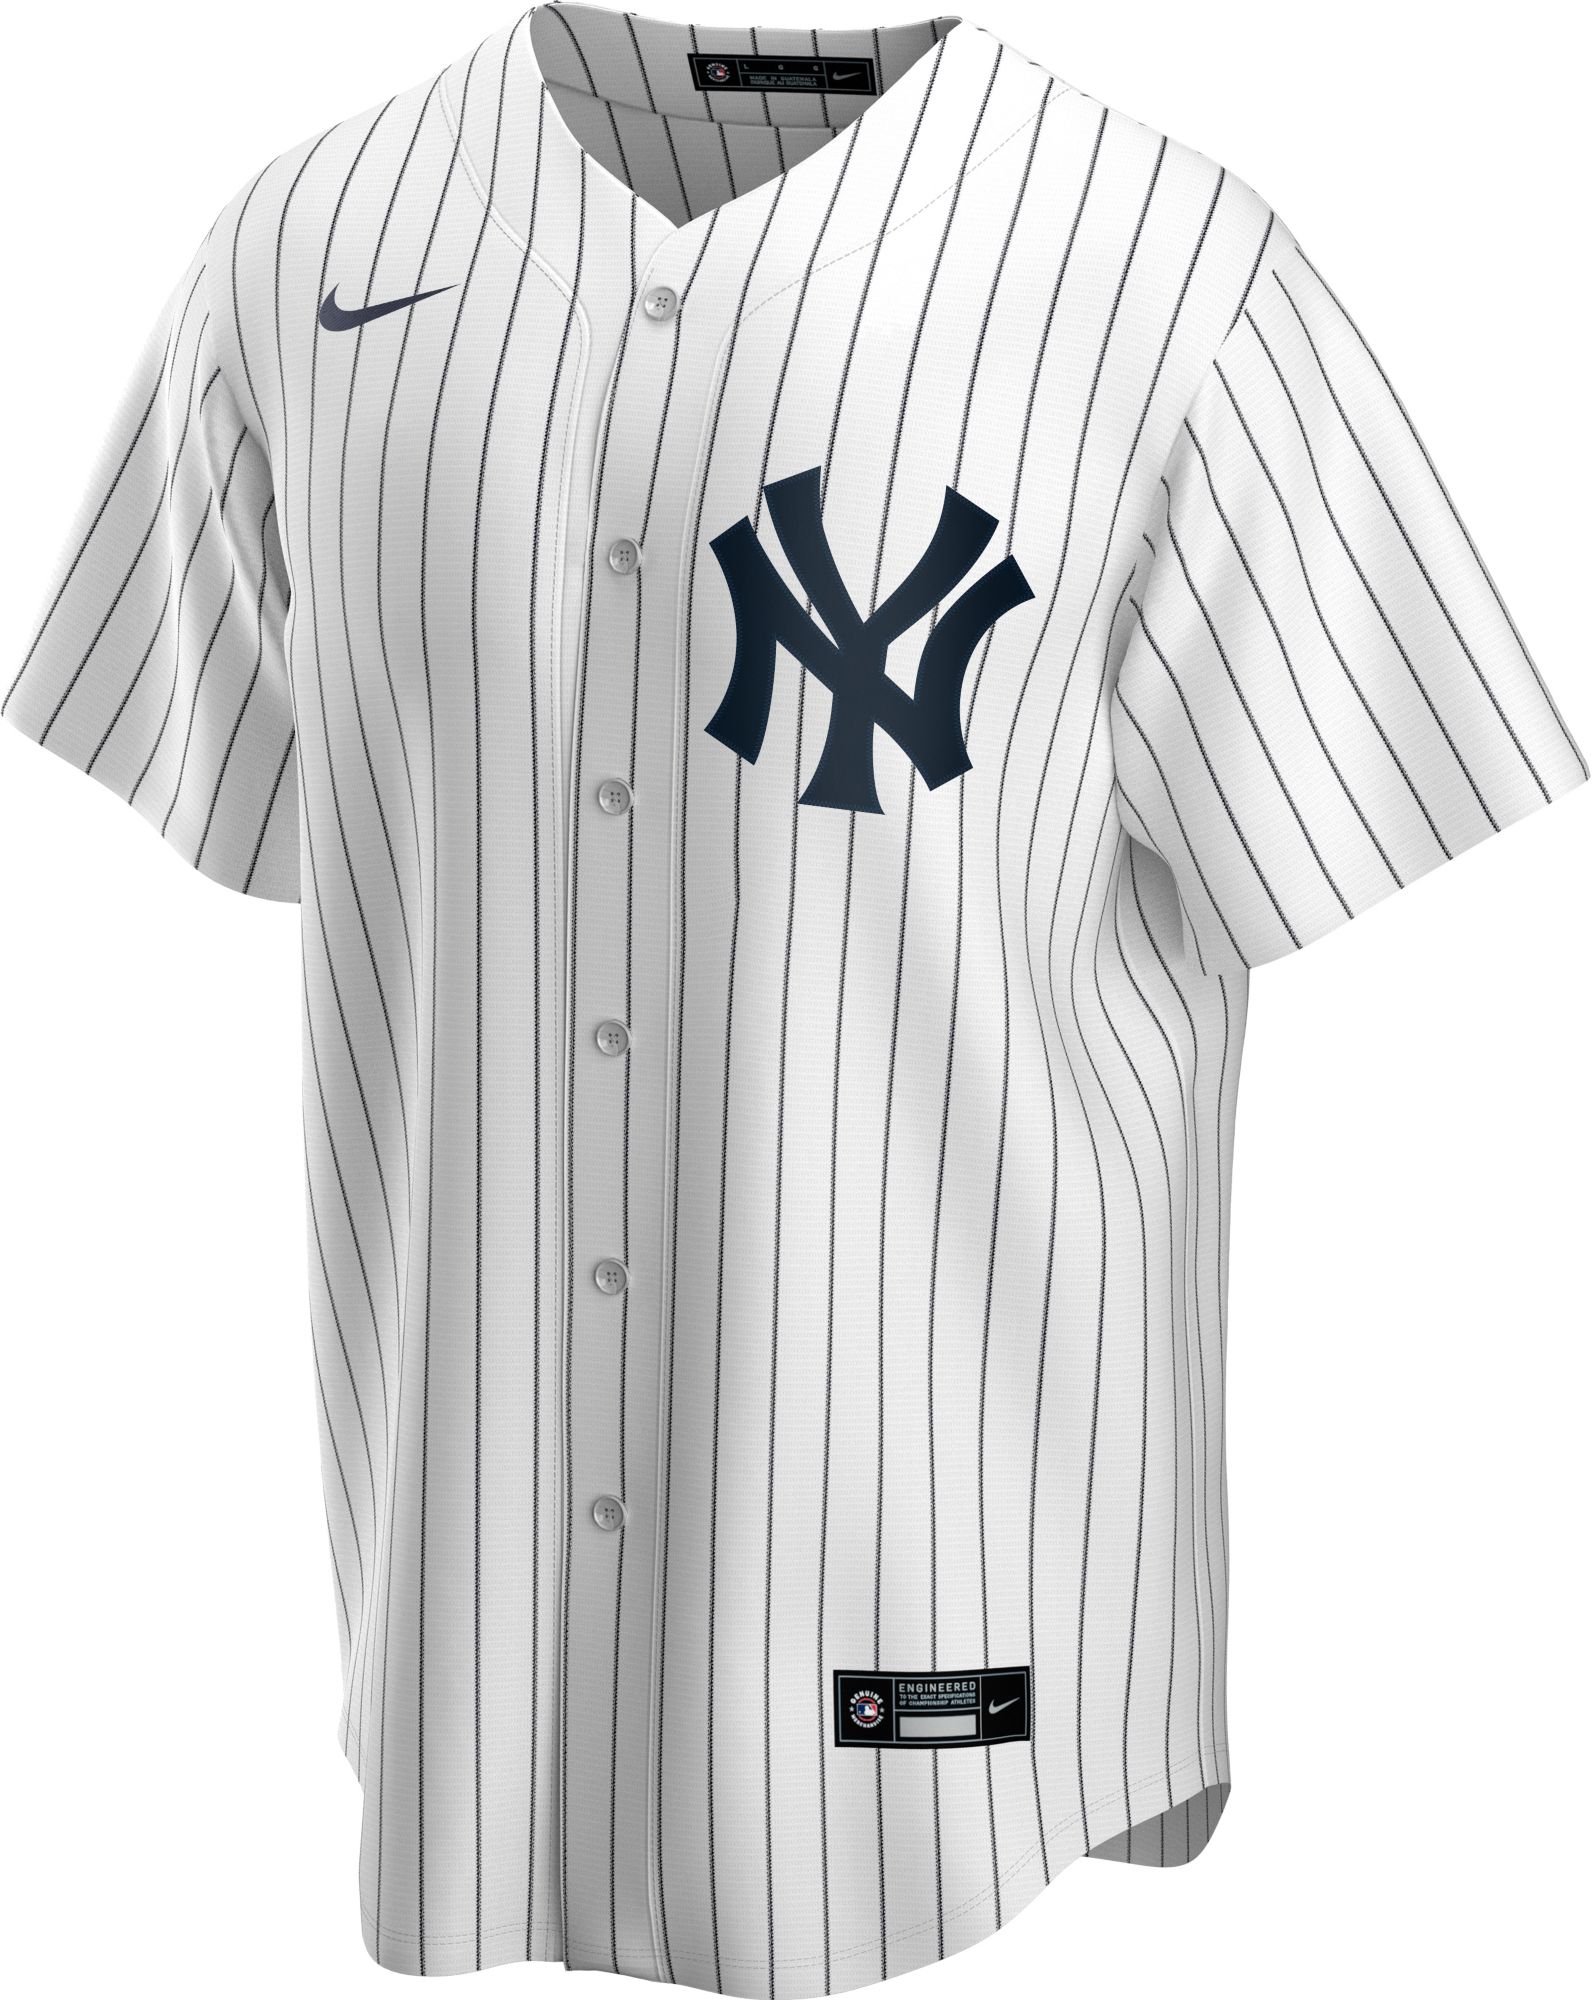 yankees mlb jersey youth size chart